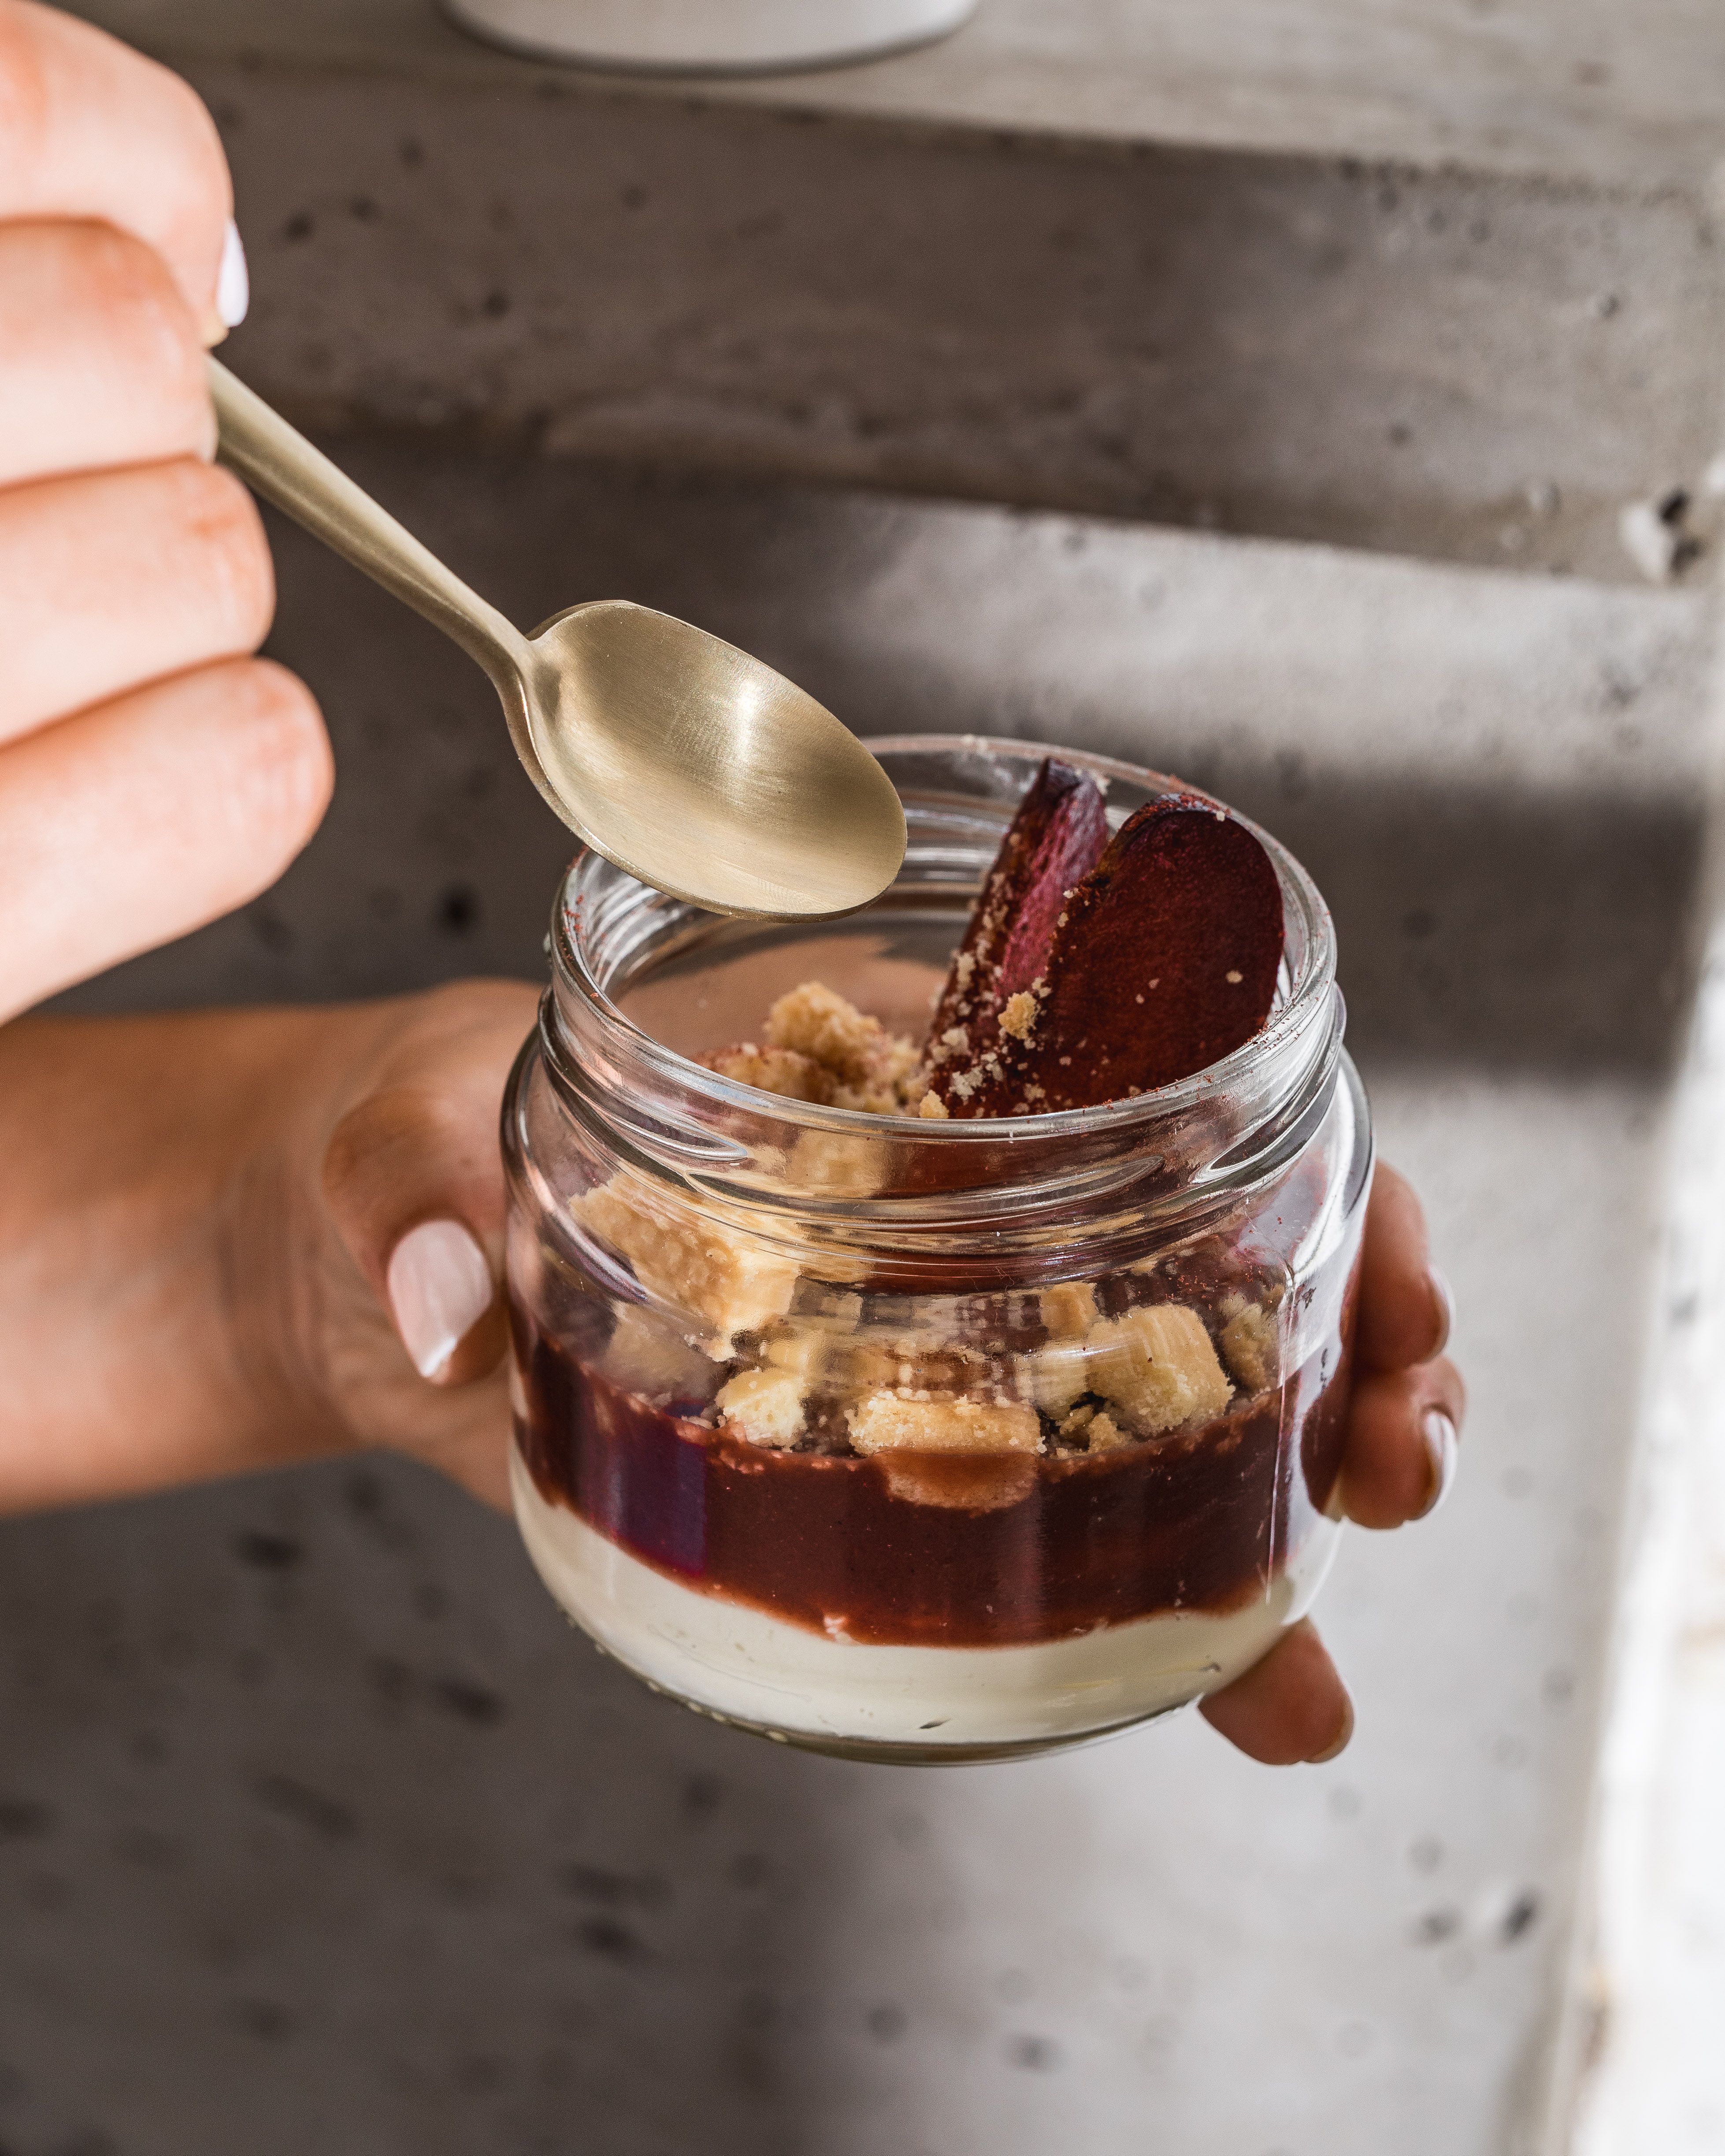 A jar of Queen Garnet Plum fool being held, with a spoon about to take out a scoop